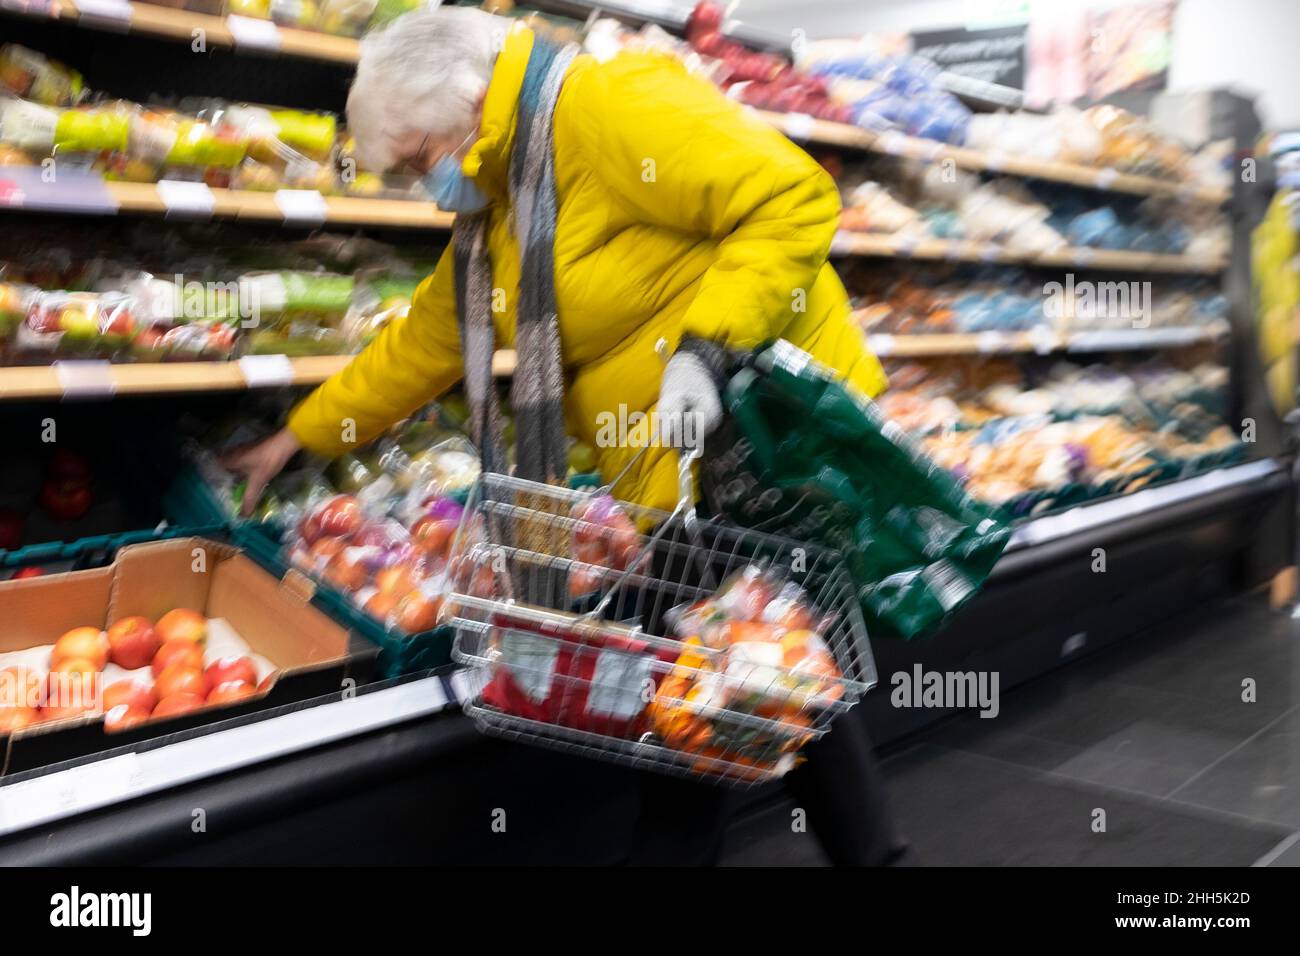 Senior person with basket bending over by shelves food shopping in M&S Marks and Spencer supermarket store aisle January 2022 Wales UK  KATHY DEWITT Stock Photo